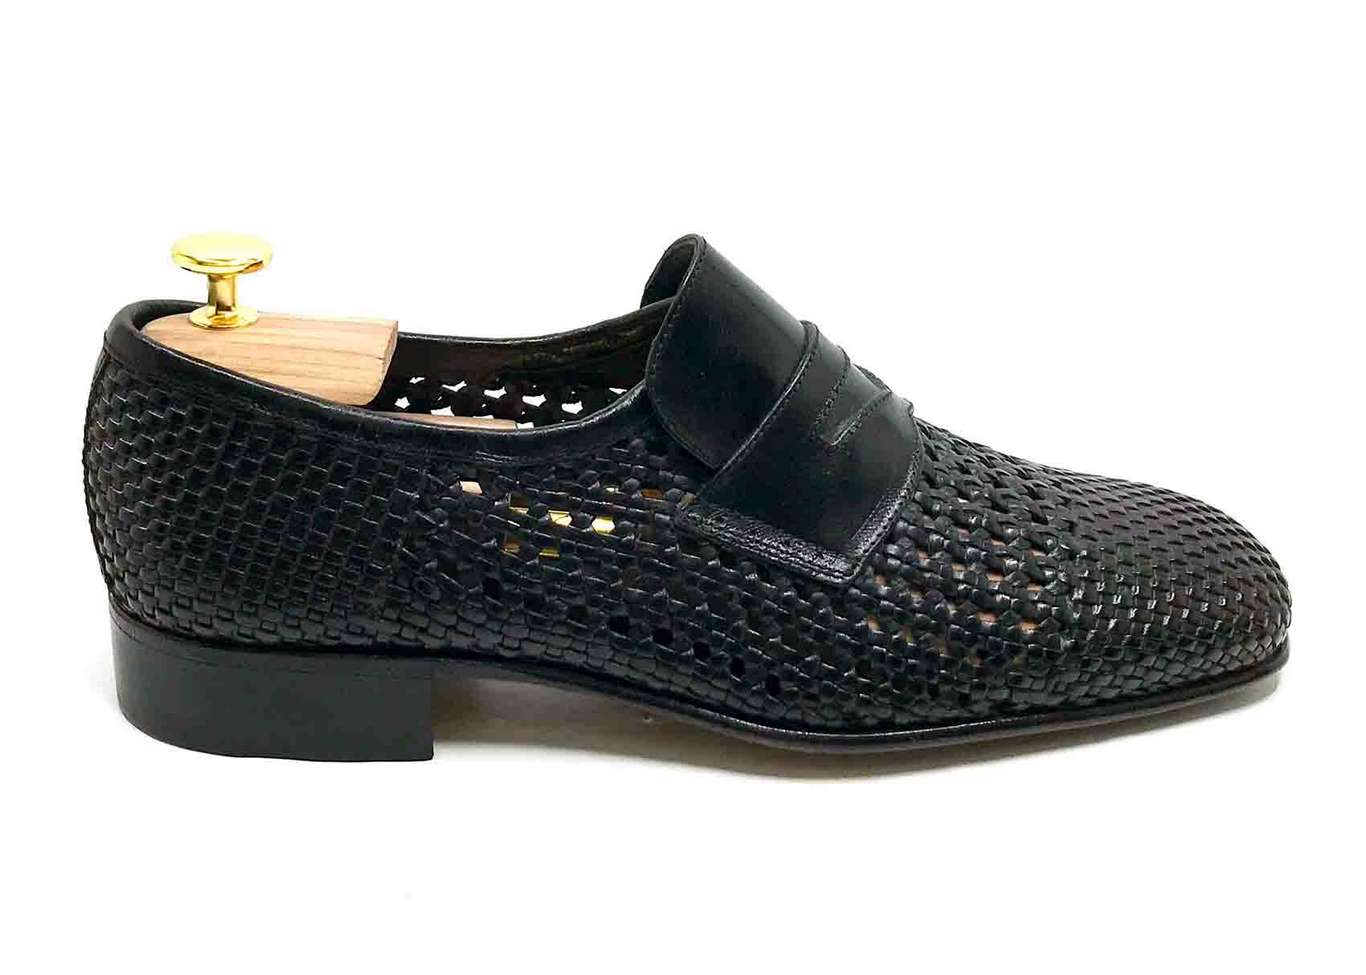 Comfort Loafer in Black woven leather